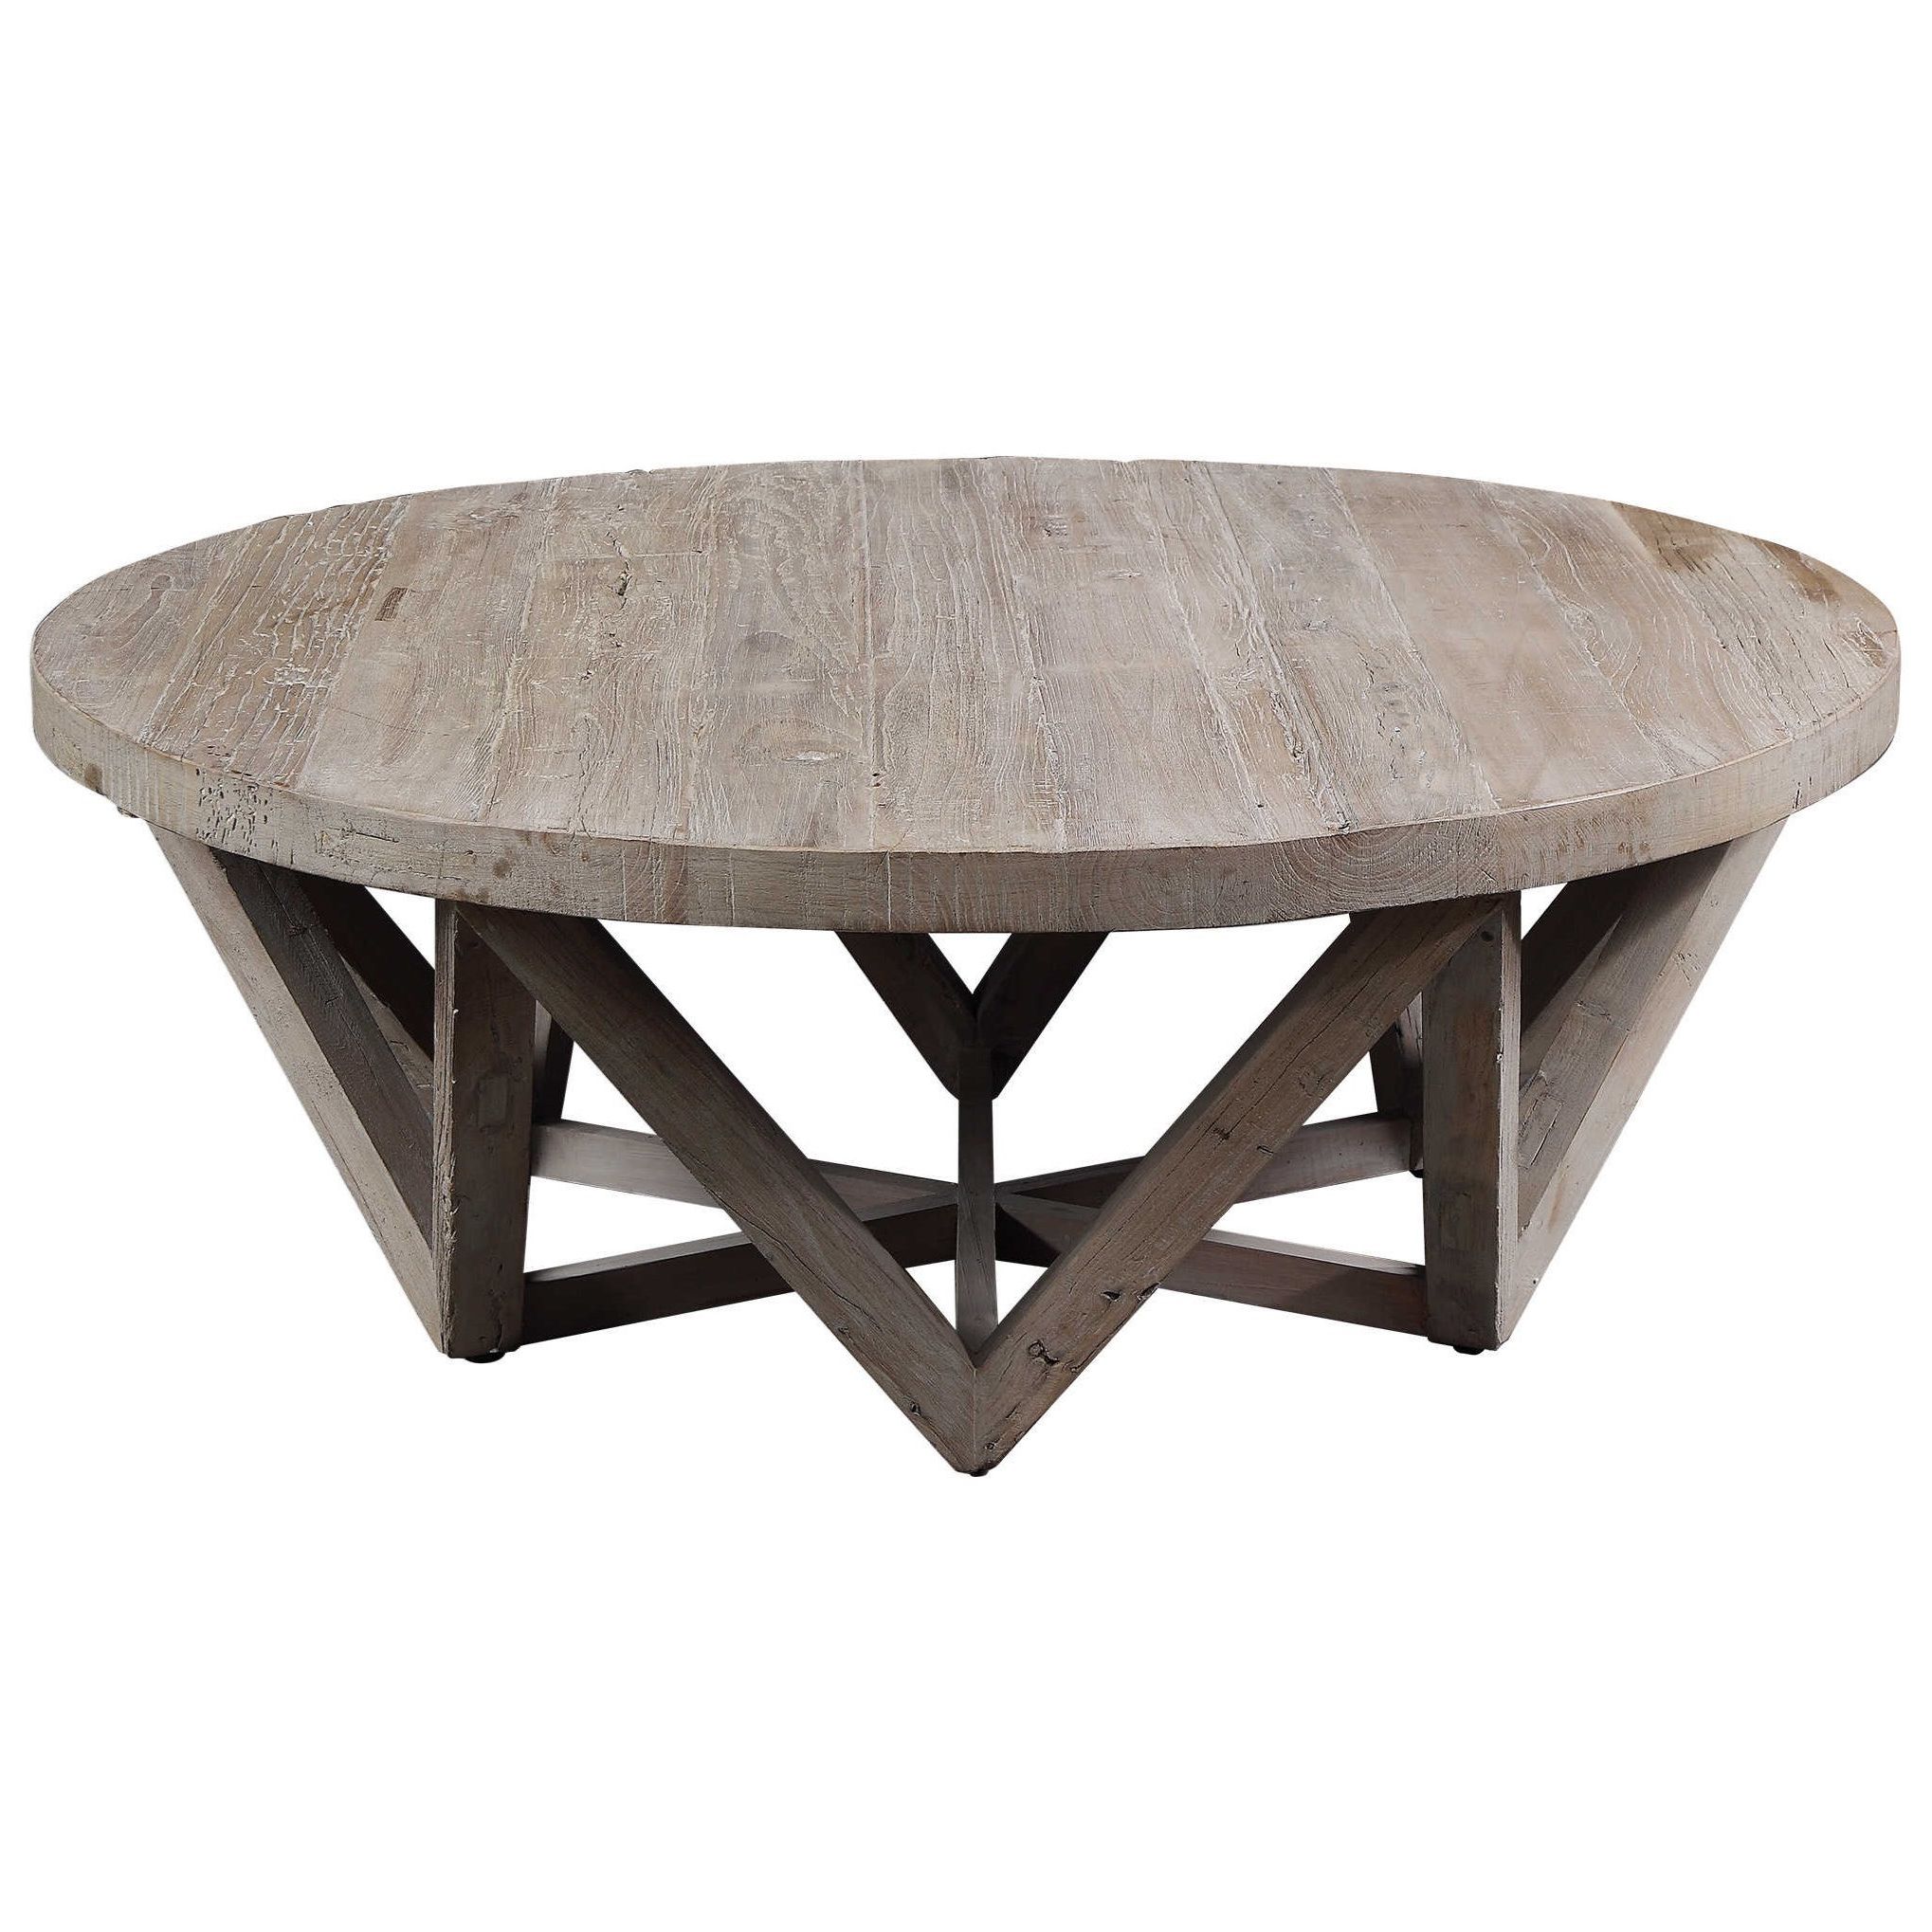 Uttermost Accent Furniture – Occasional Tables Kendry Reclaimed Wood Throughout Well Liked Occasional Coffee Tables (View 12 of 15)